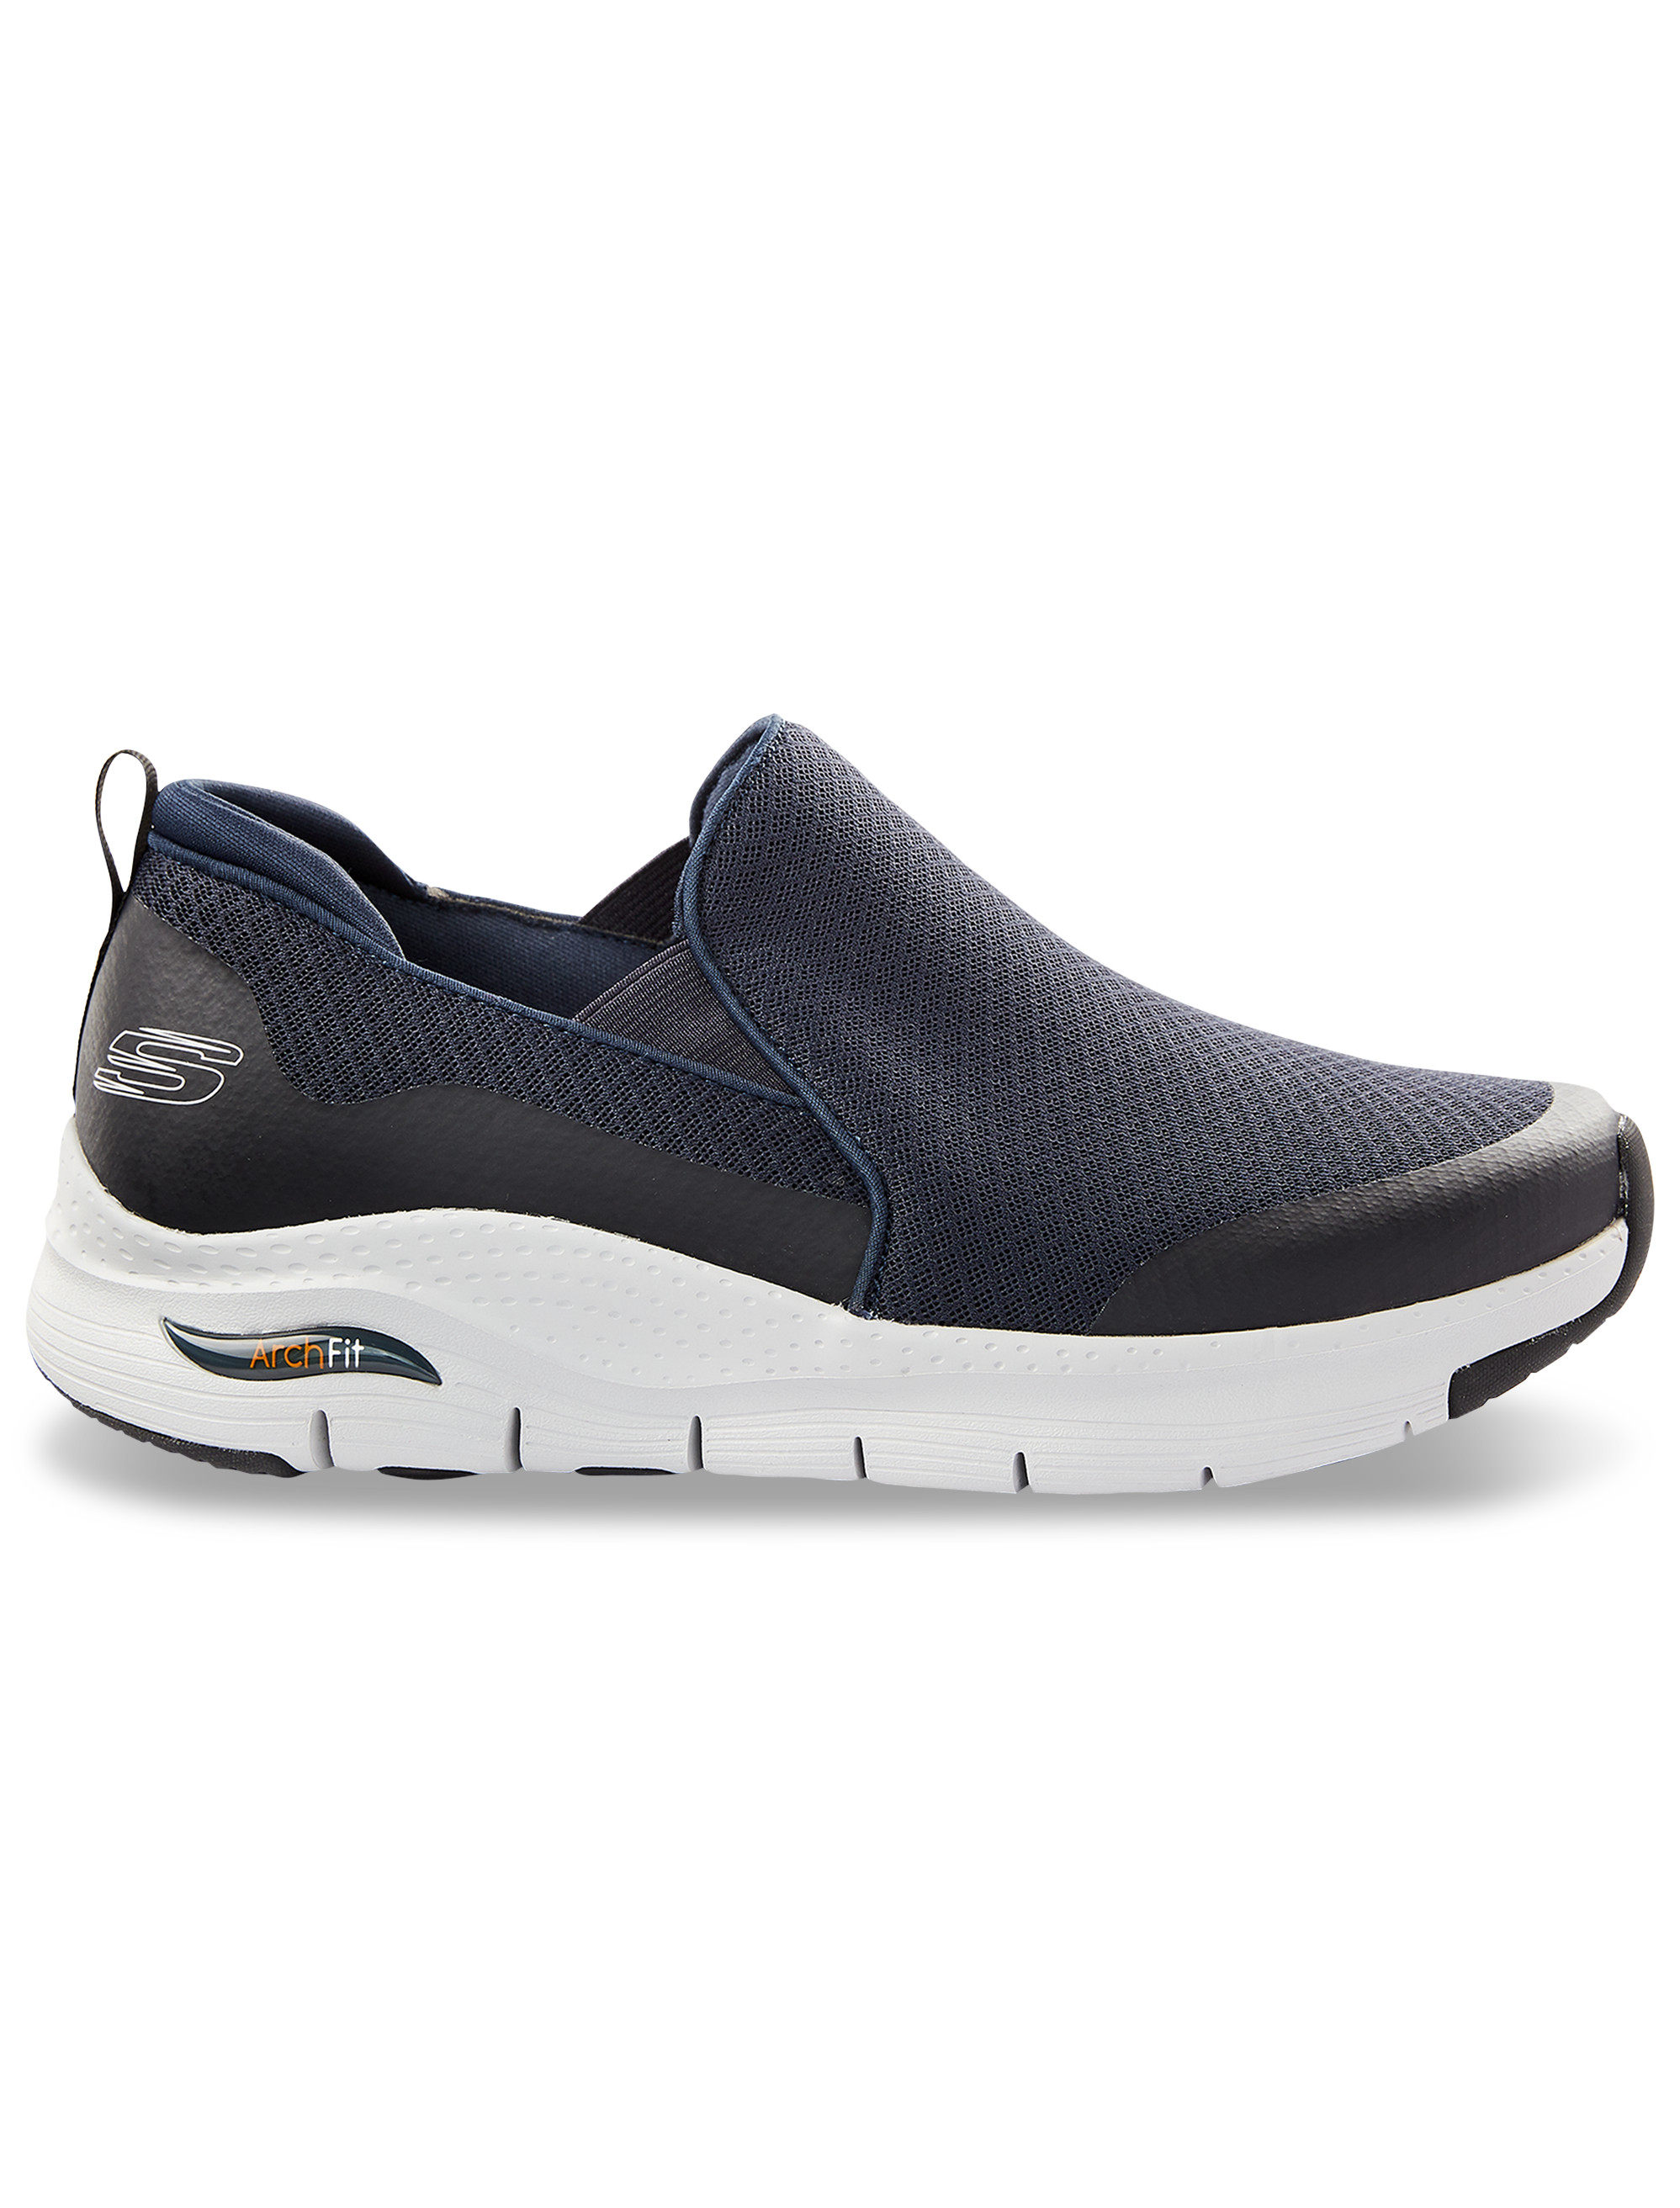 Big + Wide Sizes, Skechers Arch Fit Banlin Slip-Ons